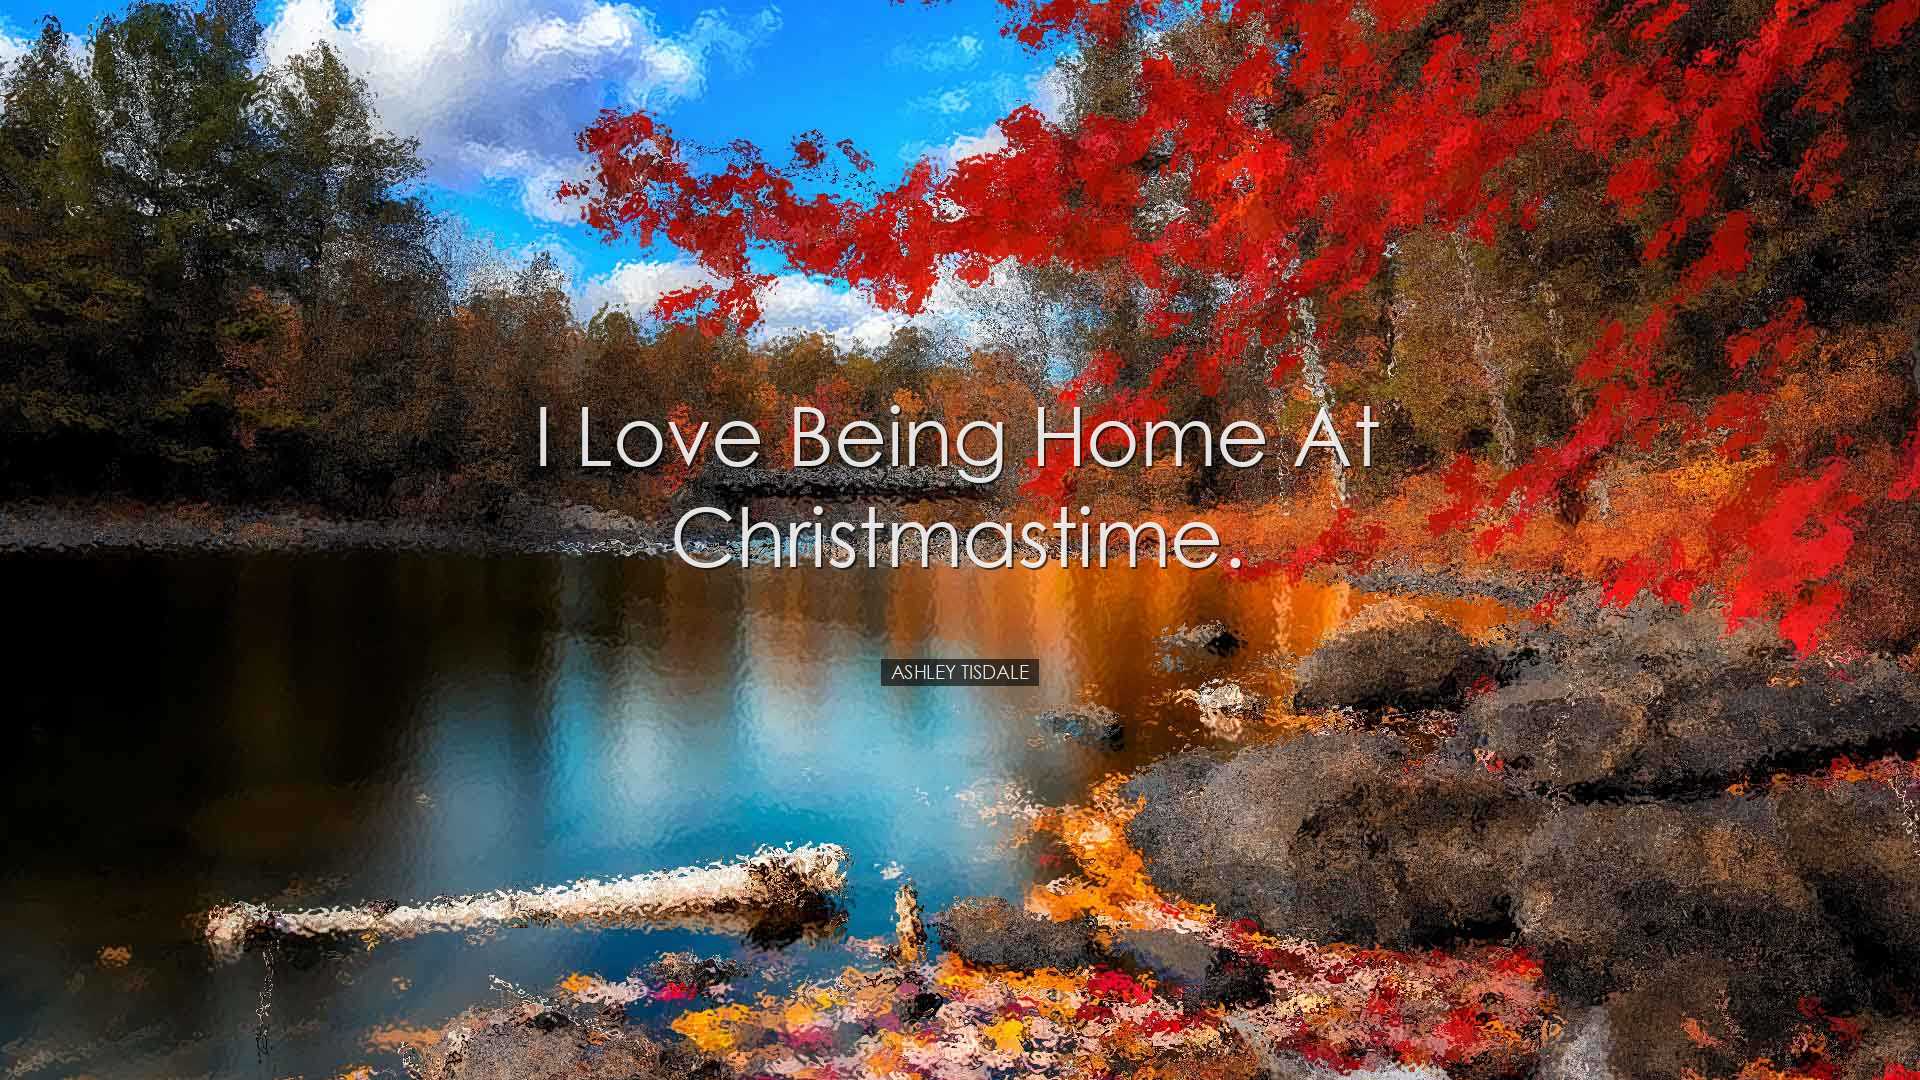 I love being home at Christmastime. - Ashley Tisdale